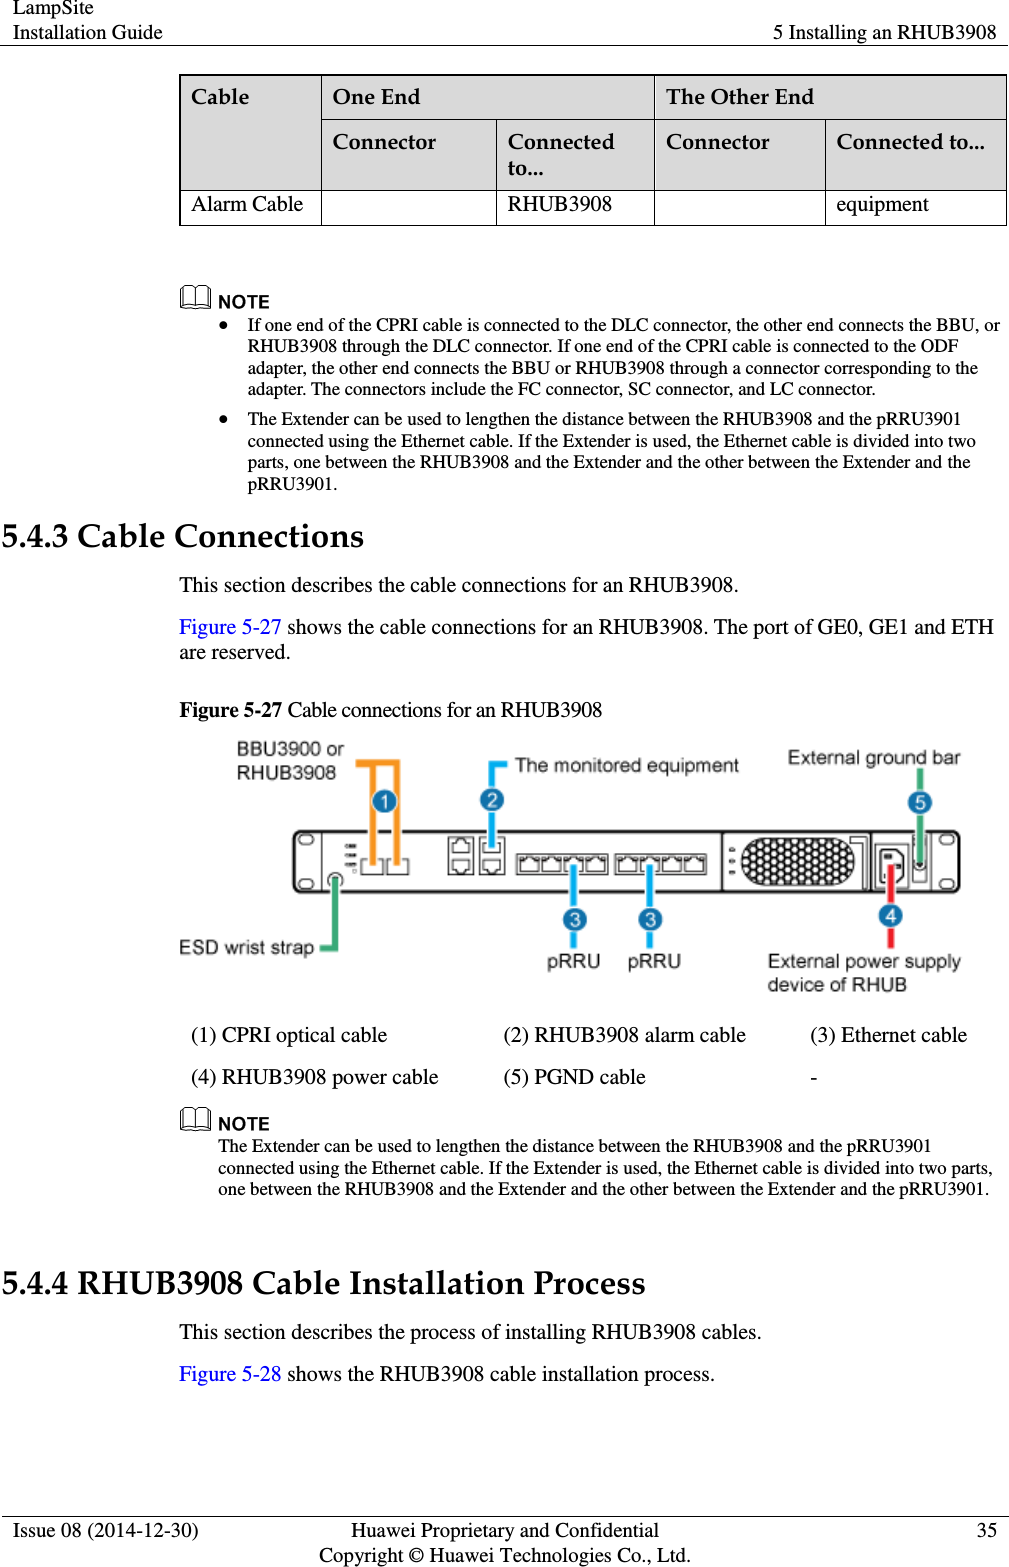 LampSite Installation Guide 5 Installing an RHUB3908  Issue 08 (2014-12-30) Huawei Proprietary and Confidential                                     Copyright © Huawei Technologies Co., Ltd. 35  Cable One End The Other End Connector Connected to... Connector Connected to... Alarm Cable RHUB3908 equipment    If one end of the CPRI cable is connected to the DLC connector, the other end connects the BBU, or RHUB3908 through the DLC connector. If one end of the CPRI cable is connected to the ODF adapter, the other end connects the BBU or RHUB3908 through a connector corresponding to the adapter. The connectors include the FC connector, SC connector, and LC connector.  The Extender can be used to lengthen the distance between the RHUB3908 and the pRRU3901 connected using the Ethernet cable. If the Extender is used, the Ethernet cable is divided into two parts, one between the RHUB3908 and the Extender and the other between the Extender and the pRRU3901. 5.4.3 Cable Connections This section describes the cable connections for an RHUB3908.   Figure 5-27 shows the cable connections for an RHUB3908. The port of GE0, GE1 and ETH are reserved.   Figure 5-27 Cable connections for an RHUB3908  (1) CPRI optical cable (2) RHUB3908 alarm cable (3) Ethernet cable (4) RHUB3908 power cable (5) PGND cable -  The Extender can be used to lengthen the distance between the RHUB3908 and the pRRU3901 connected using the Ethernet cable. If the Extender is used, the Ethernet cable is divided into two parts, one between the RHUB3908 and the Extender and the other between the Extender and the pRRU3901.  5.4.4 RHUB3908 Cable Installation Process This section describes the process of installing RHUB3908 cables.   Figure 5-28 shows the RHUB3908 cable installation process.   